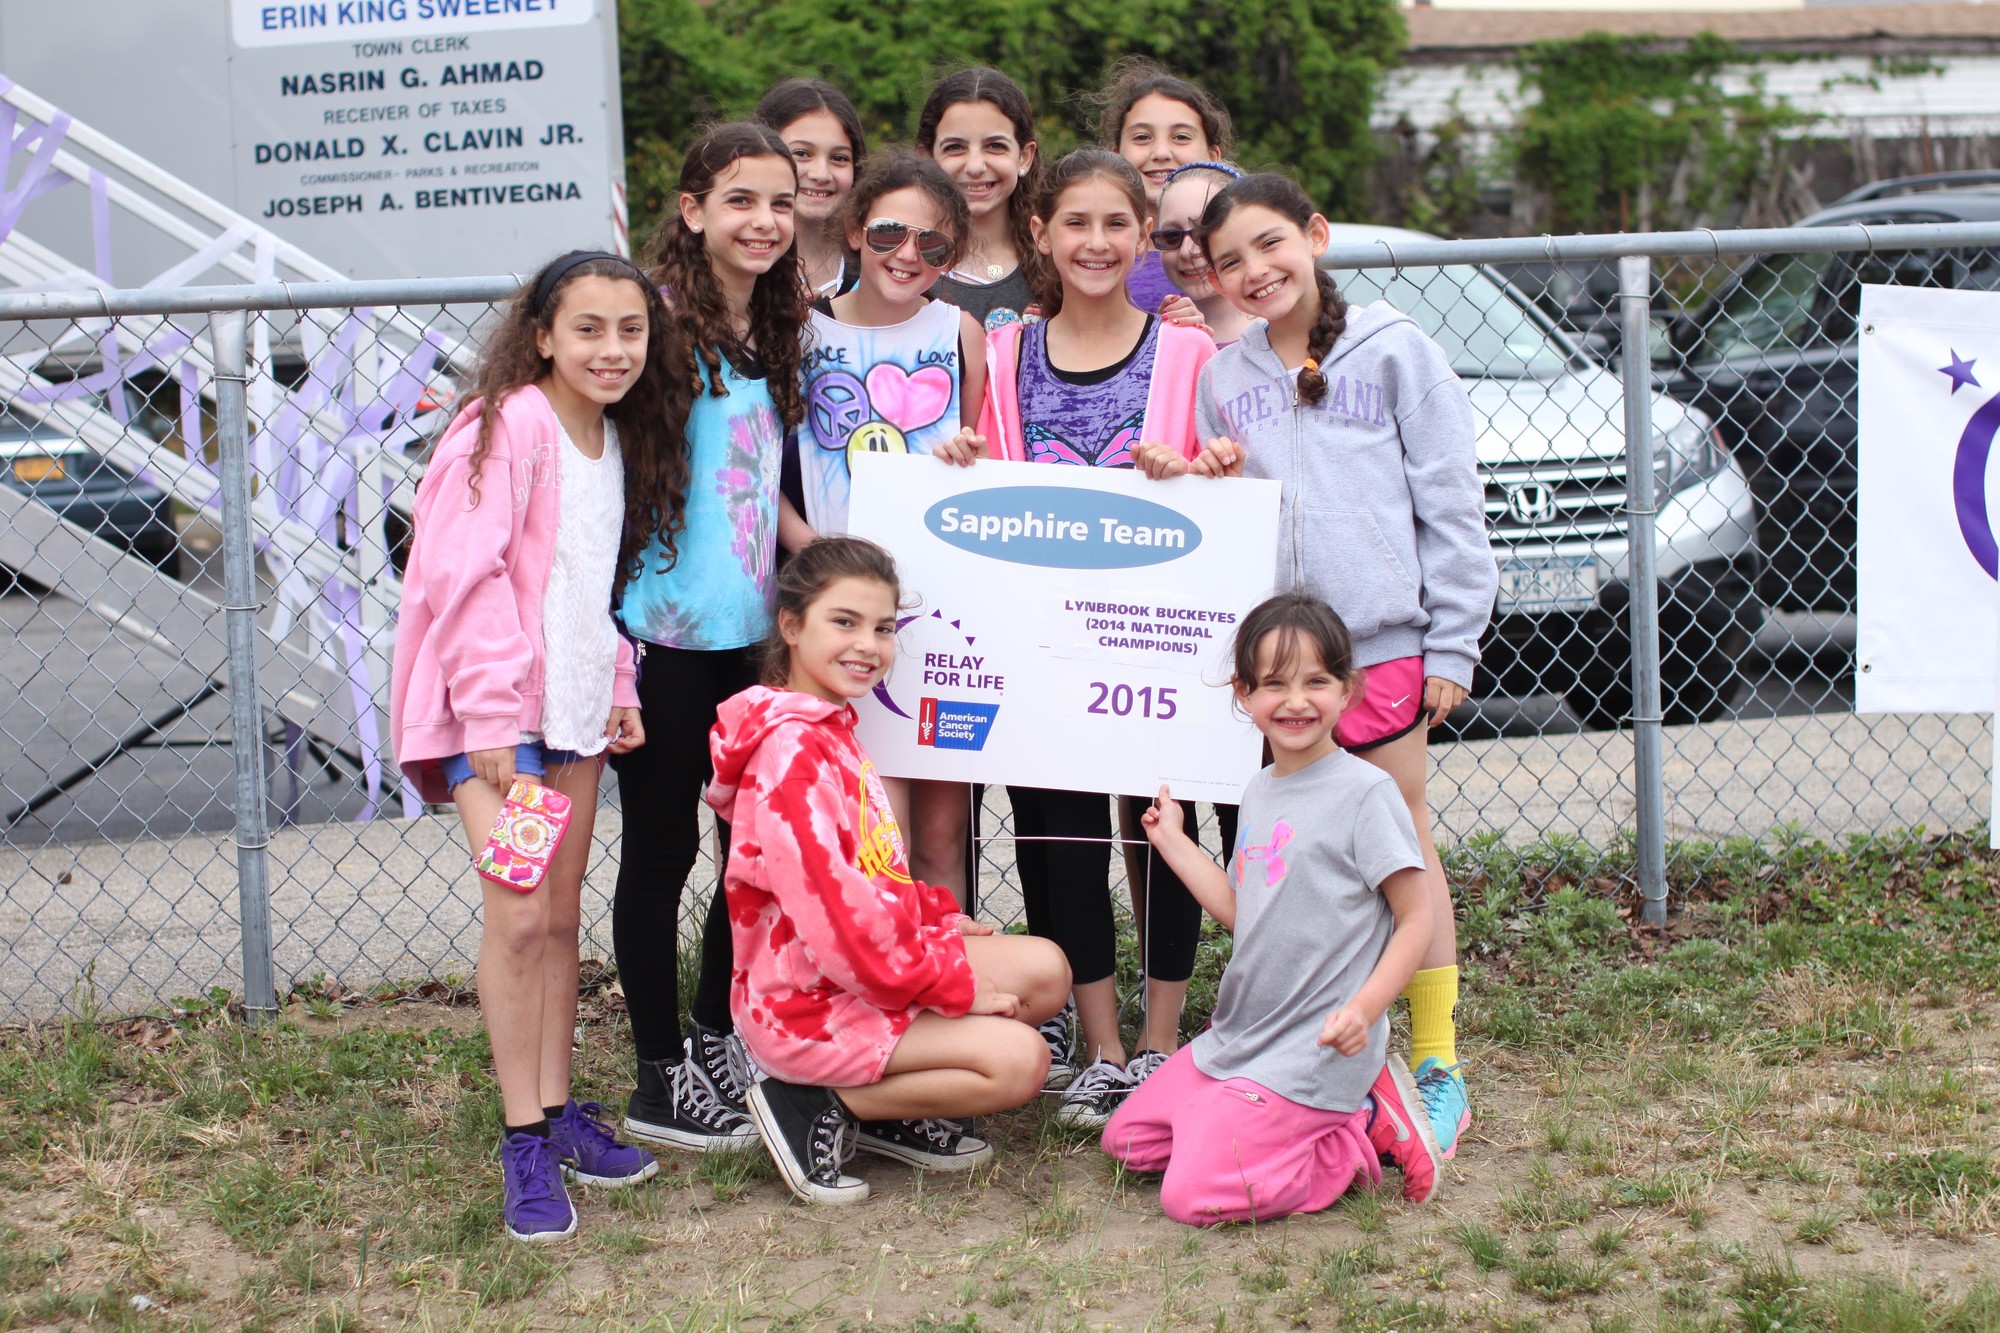 Members of the Relay for Life team "Lynbrook Buckeyes (2014 National Champions)" helped raise over $19,000 for the American Cancer Society.